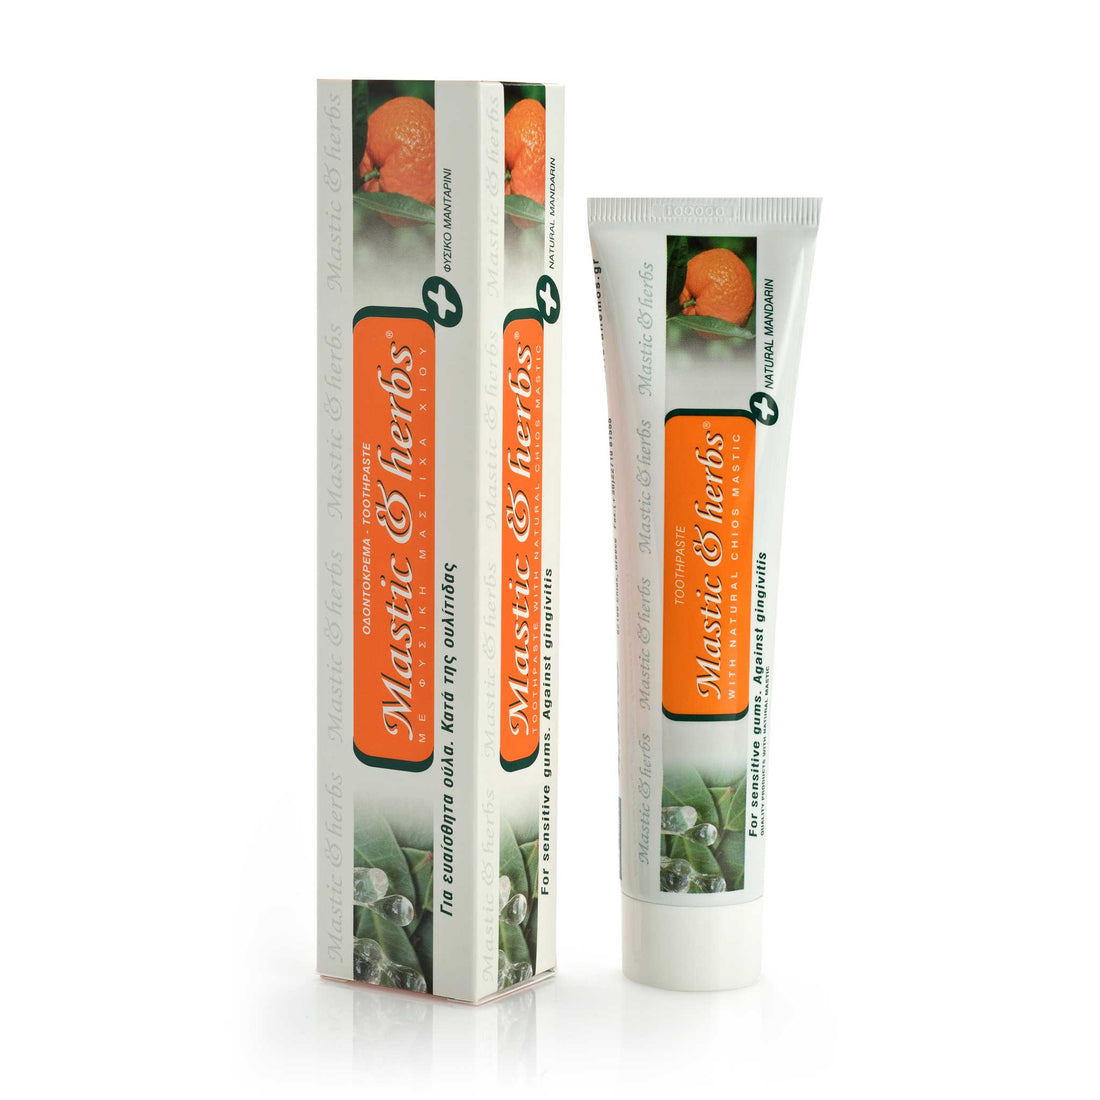 Natural toothpastes without fluoride. And with Chios mastic oil!